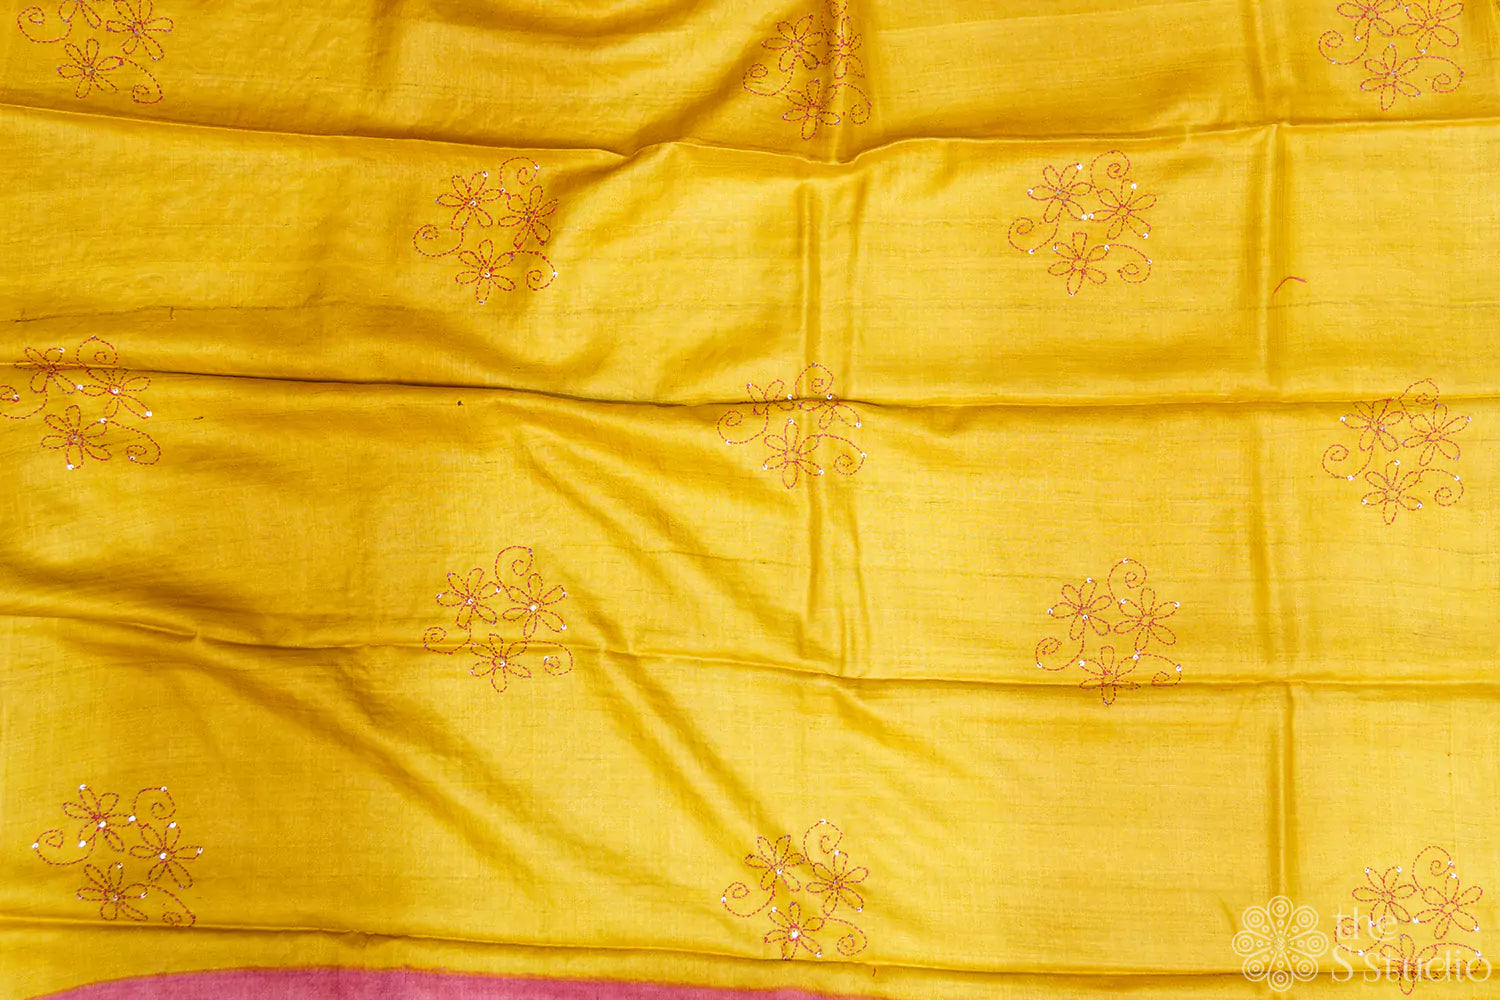 Pink tussar silk saree with block prints and hand embroidery